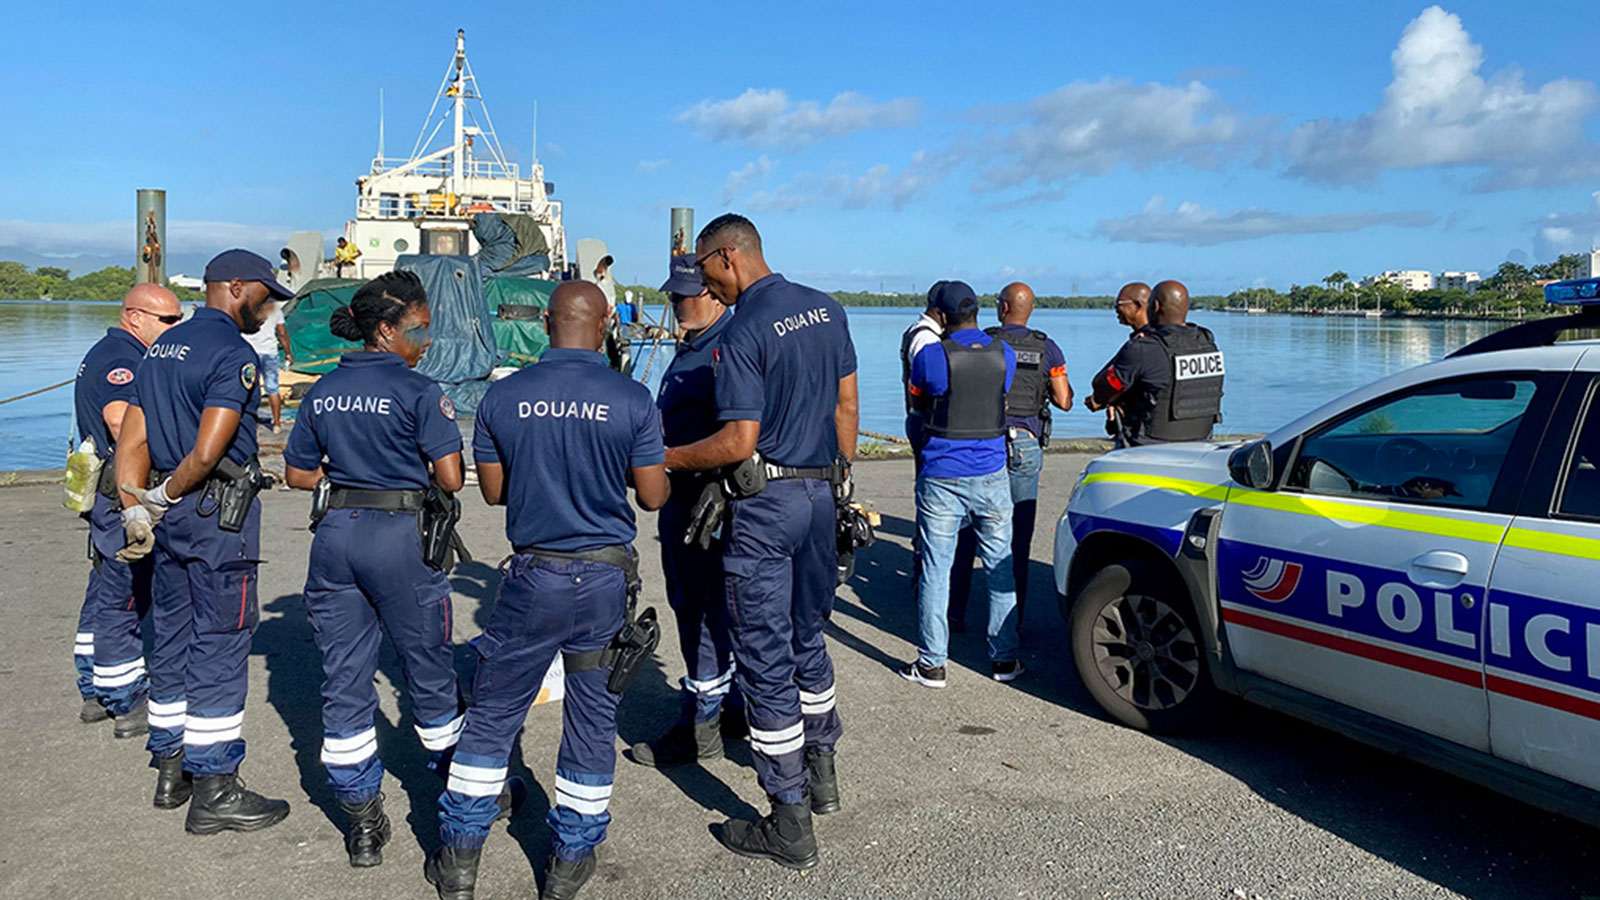 Hundreds of firearms and 12.6 tonnes of drugs seized in Caribbean operation